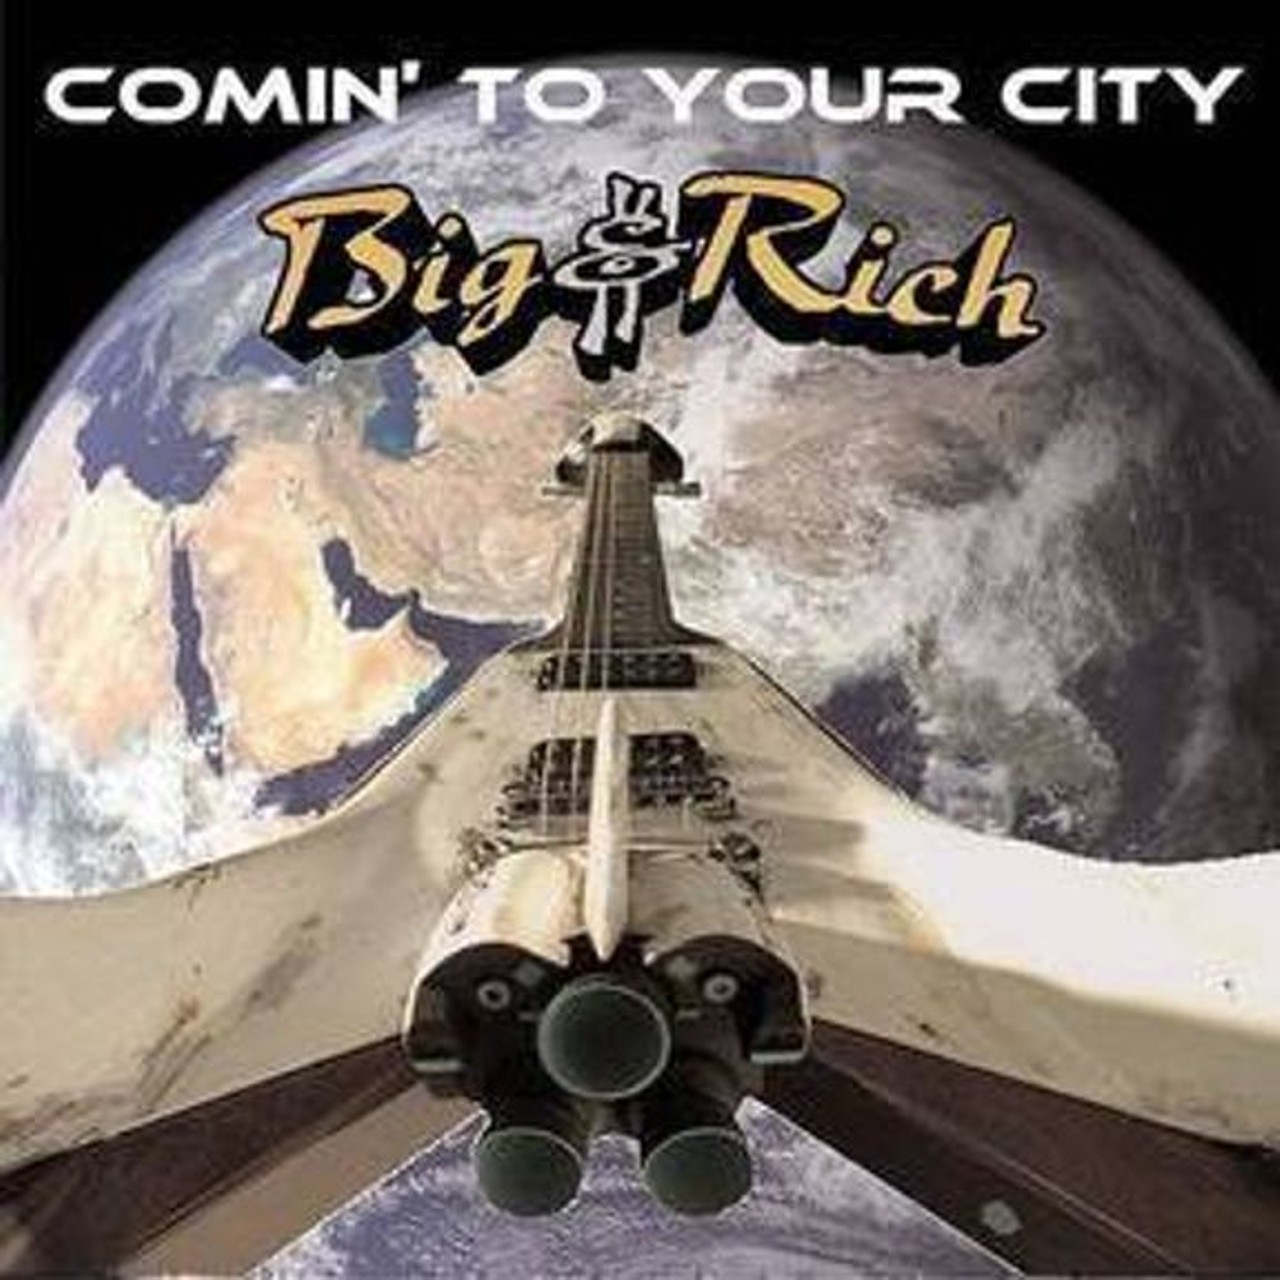 "Comin' to Your City" by Big and Rich 
Well we flew through Cincinnati
And we all got really happy
Grabbed a bowl of that Skyline Chili along the way